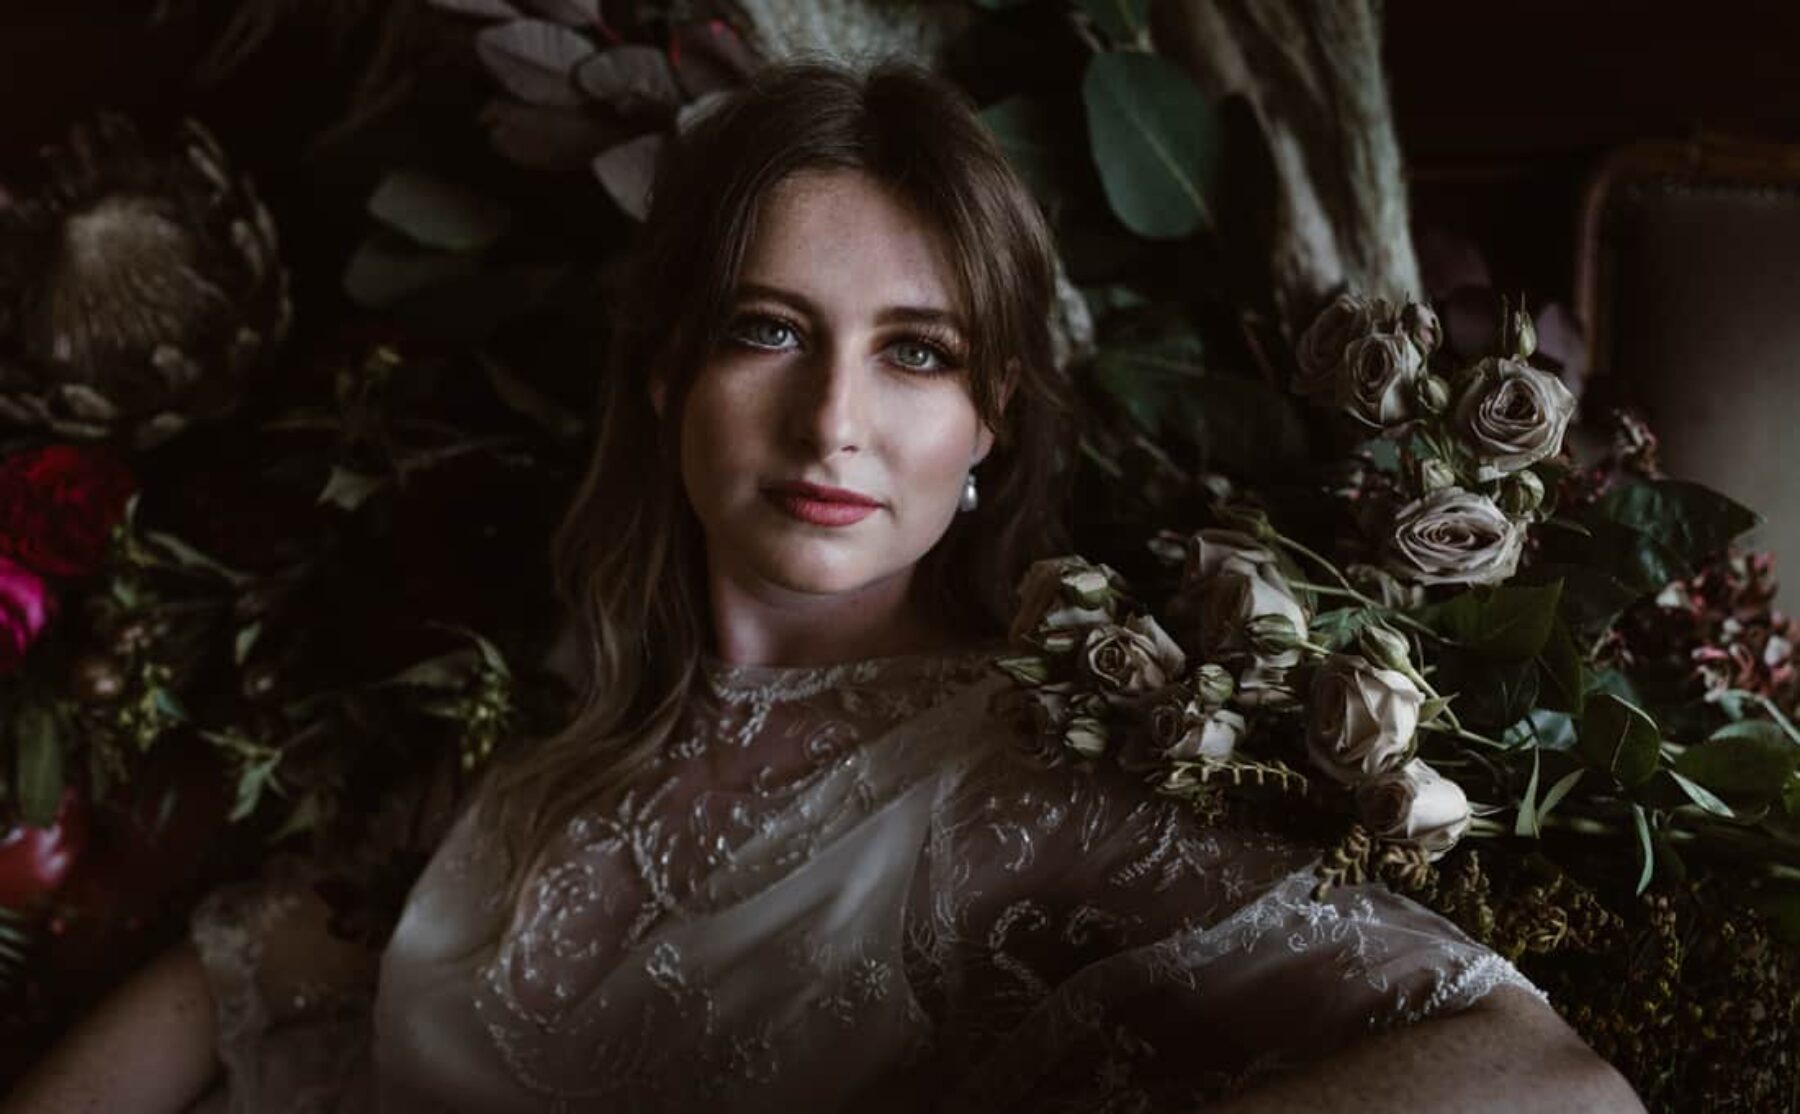 vintage winter wedding inspiration at The Stanley pub in Perth WA